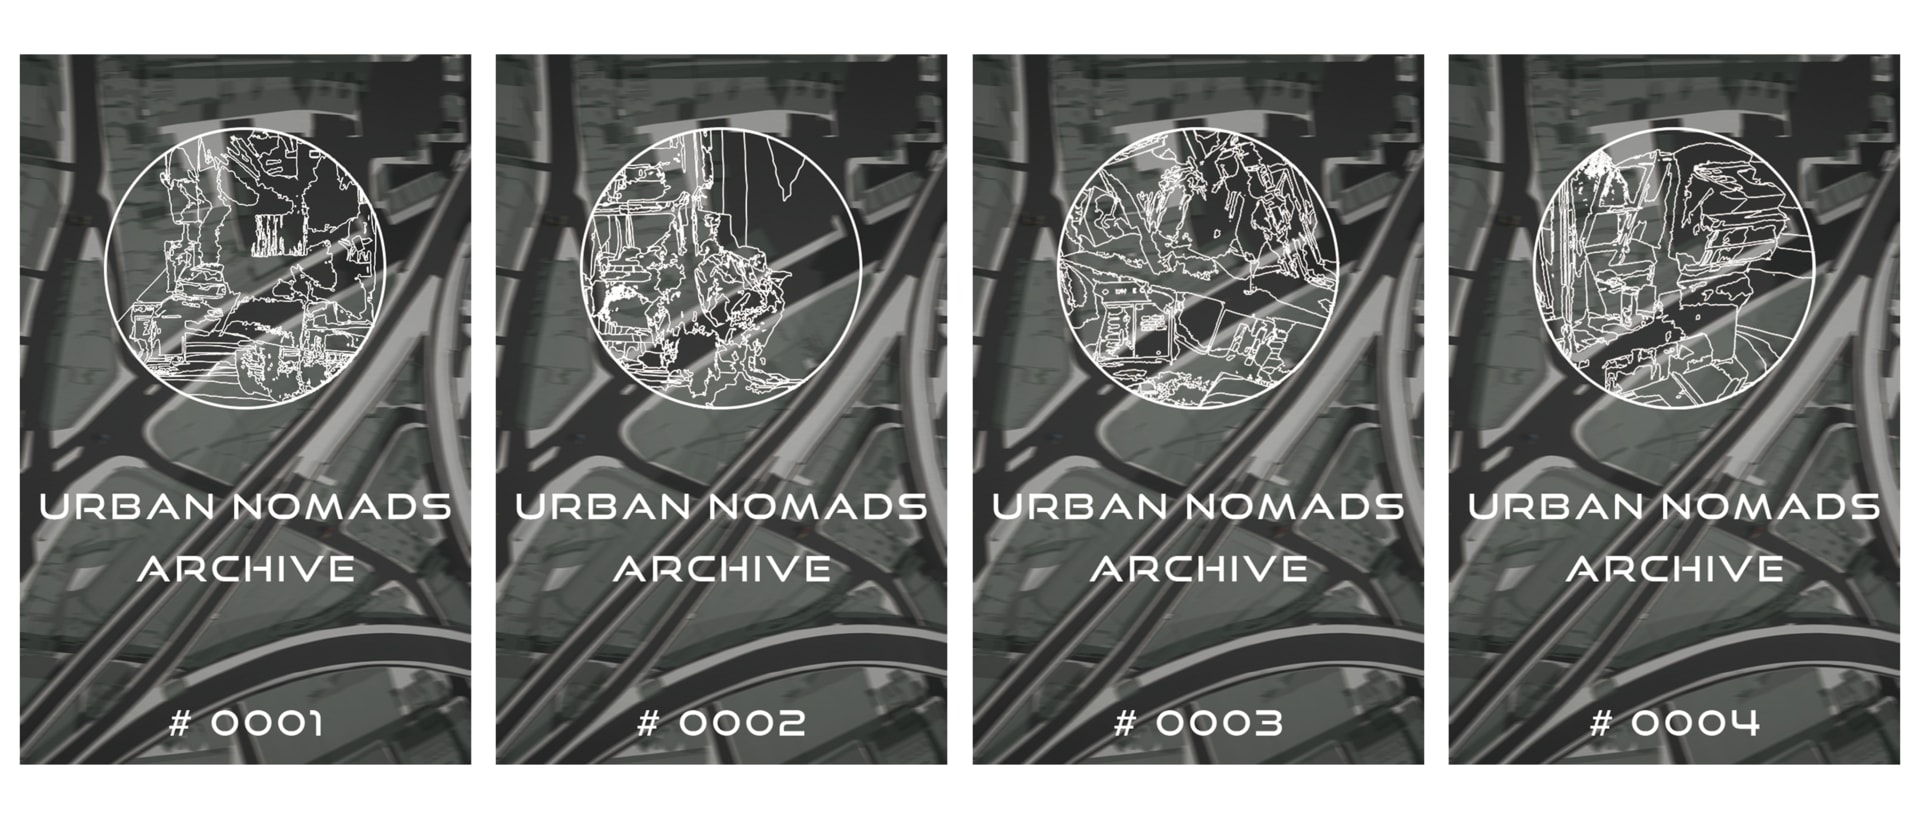 Urban Nomads Archive ｜ Nomad ID, Mixed media